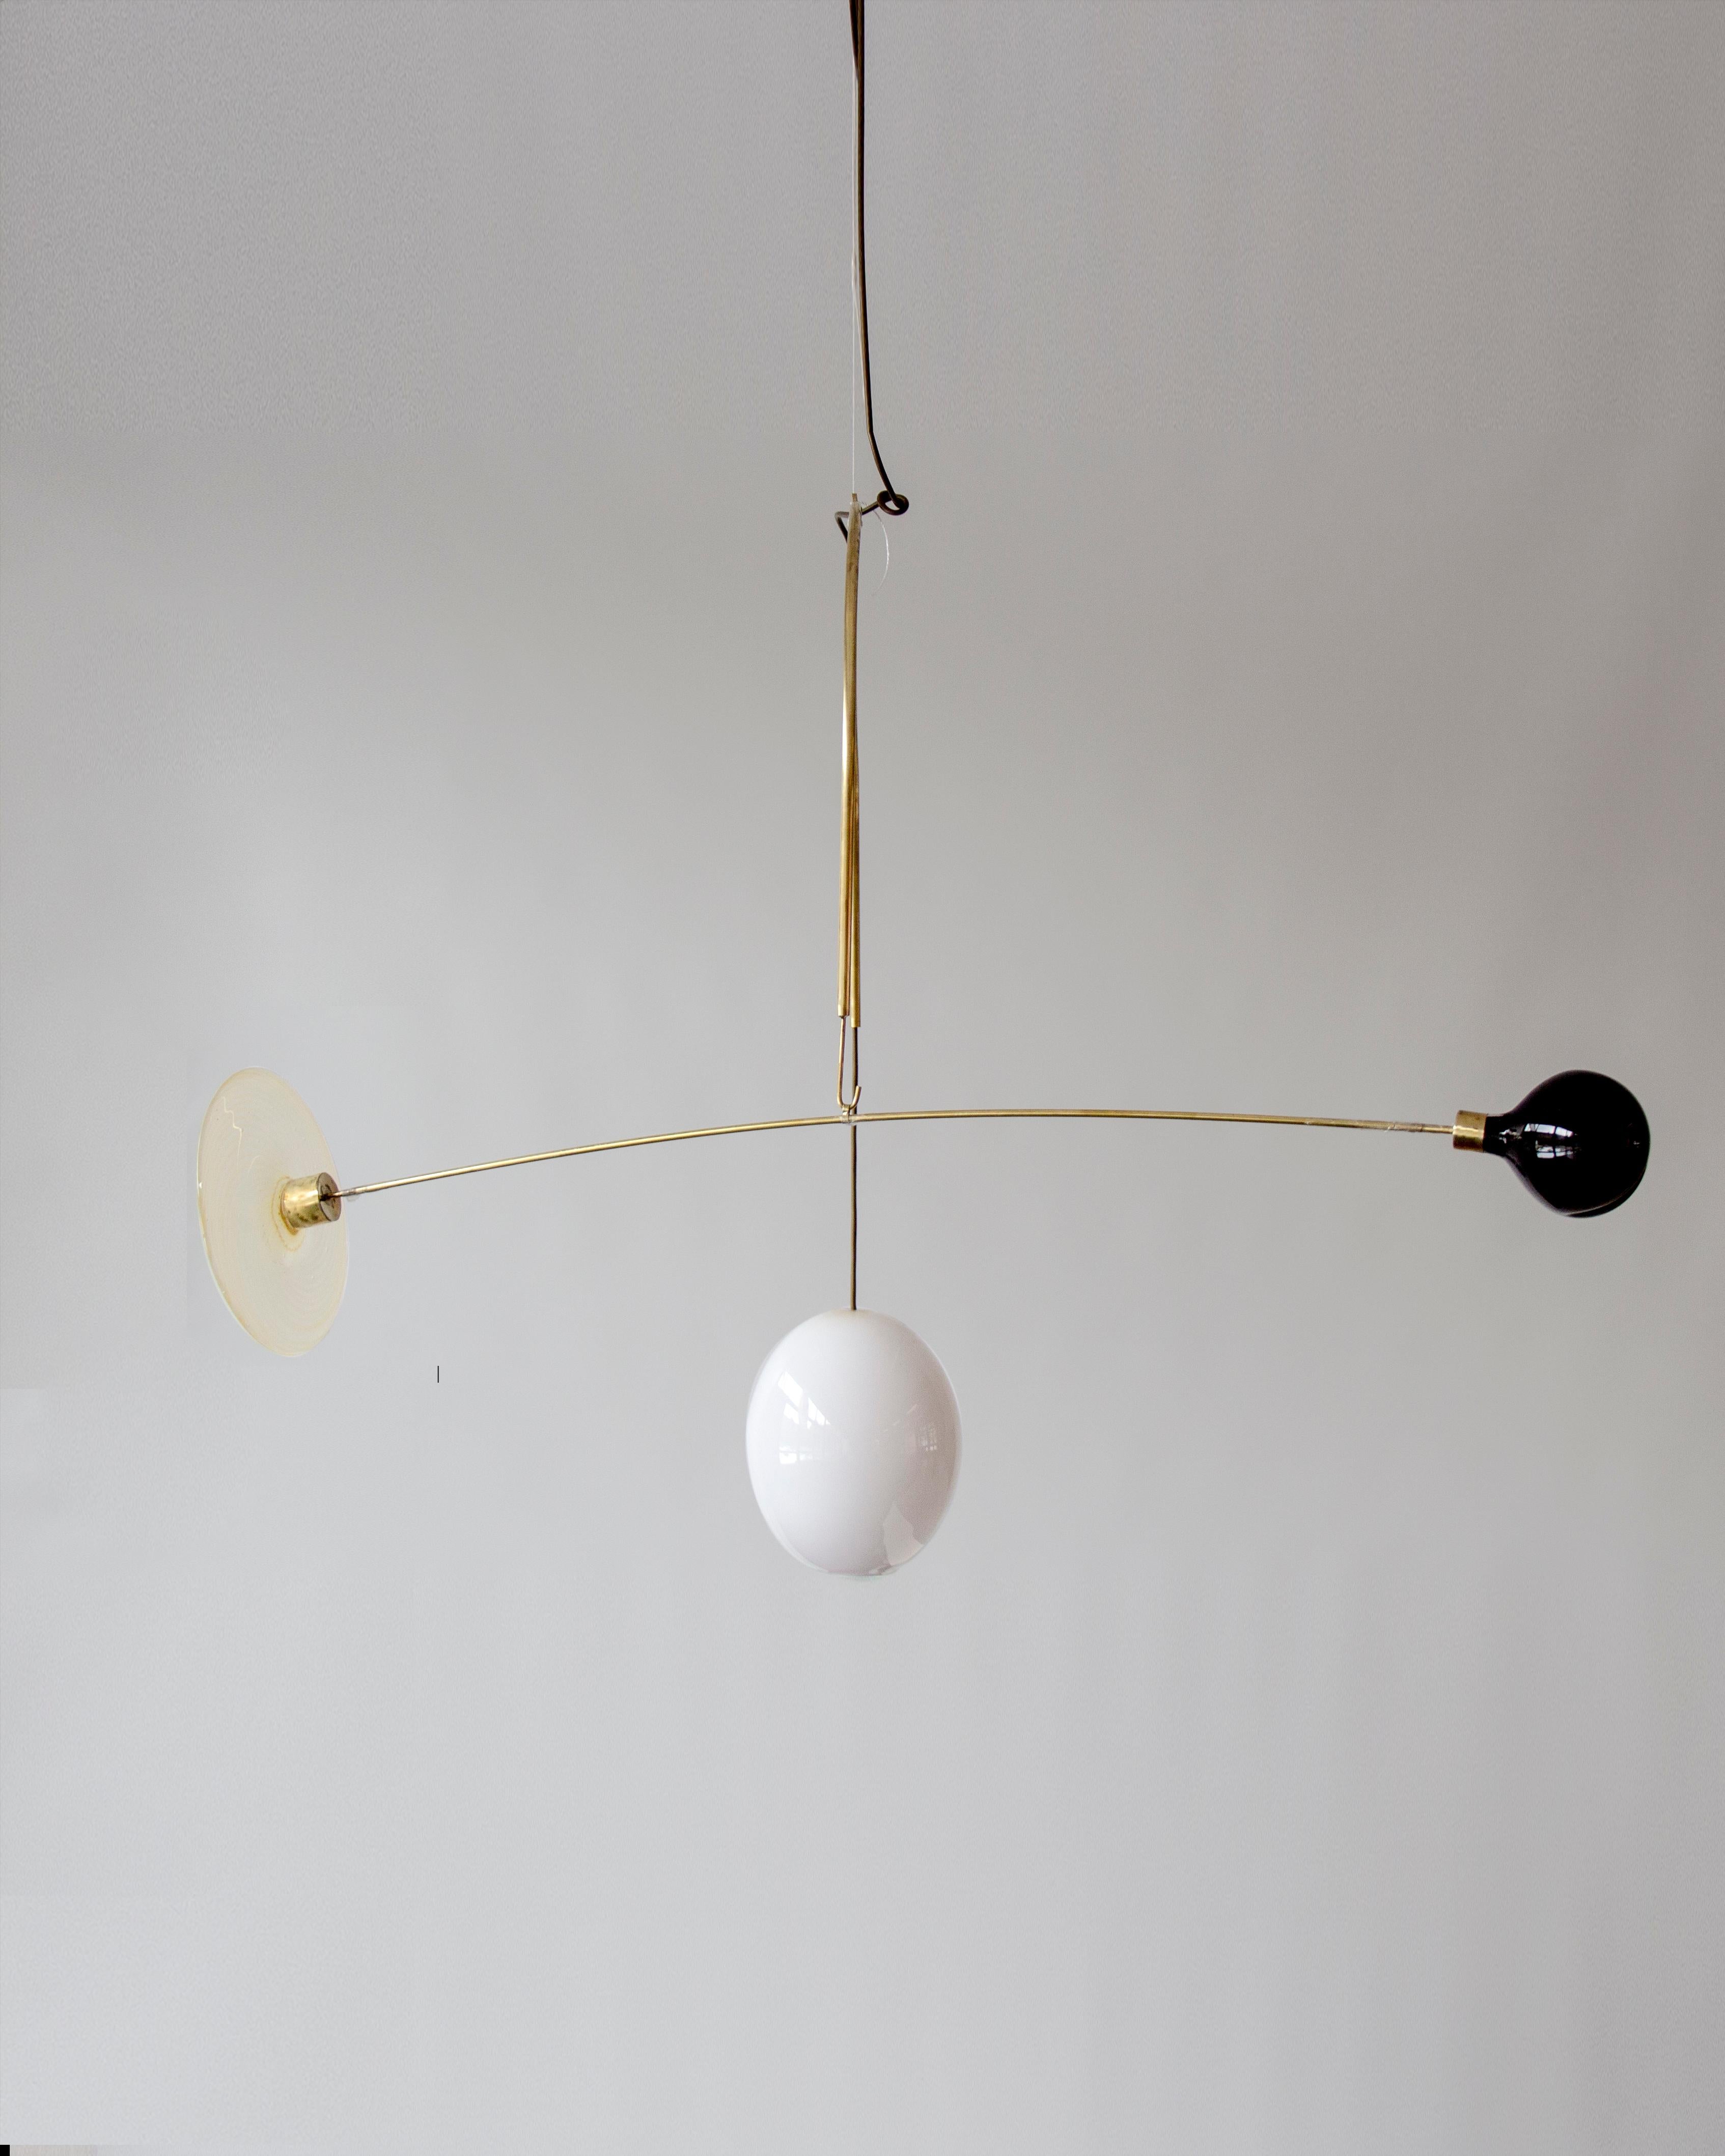 Sculptural light no. 65 by Milla Vaahtera
Dimensions: W 103 x D 55 x H 70 cm
Materials: Glass, brass

In 2020 Milla Vaahtera started a series of unique sculptural lights made out of brass and hand blown glass.
